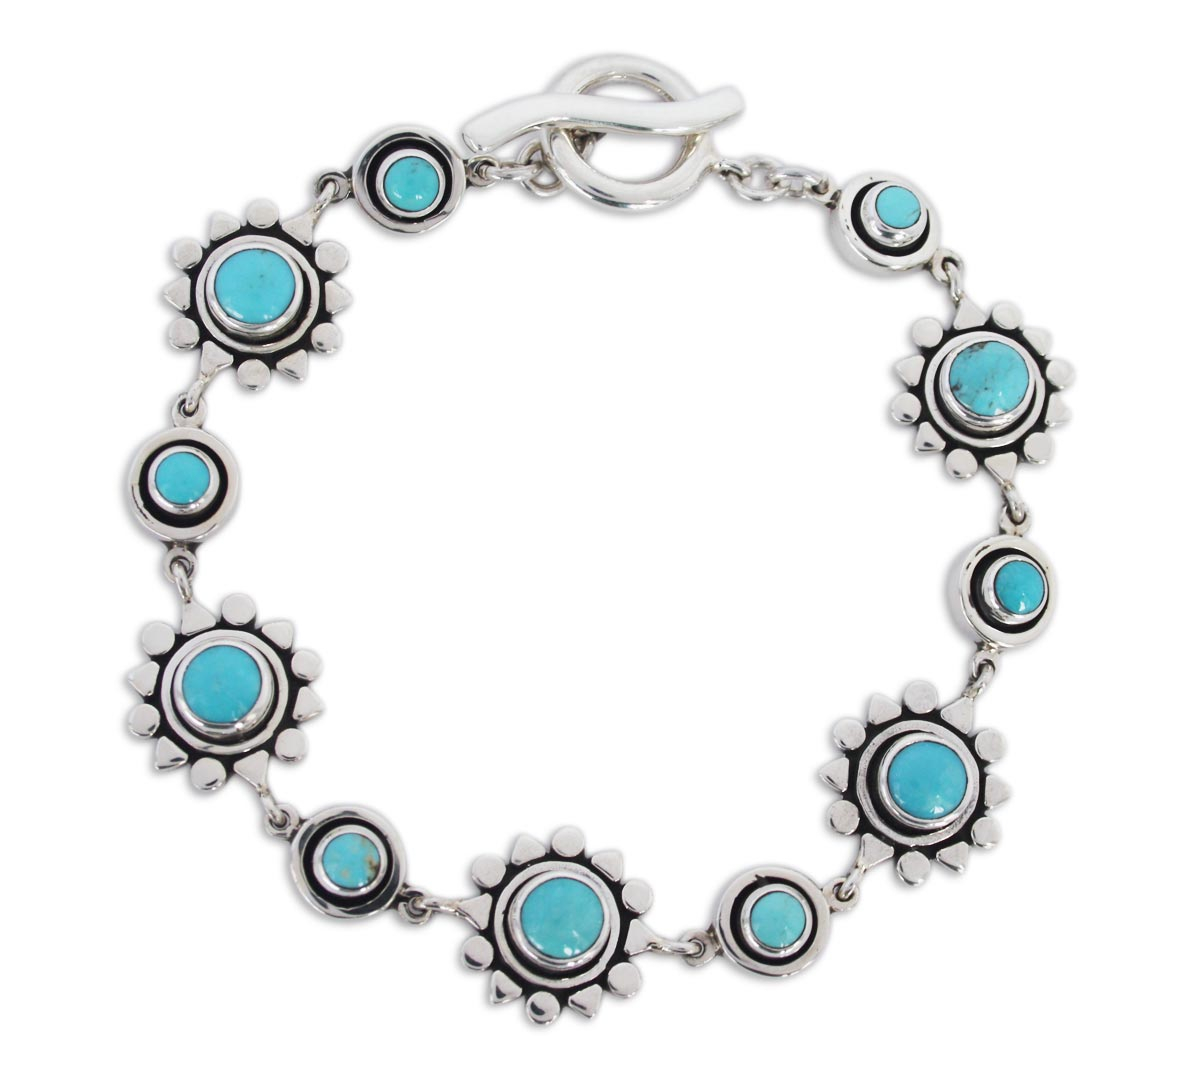 UNICEF Market | Artisan Crafted Silver and Natural Turquoise Bracelet ...